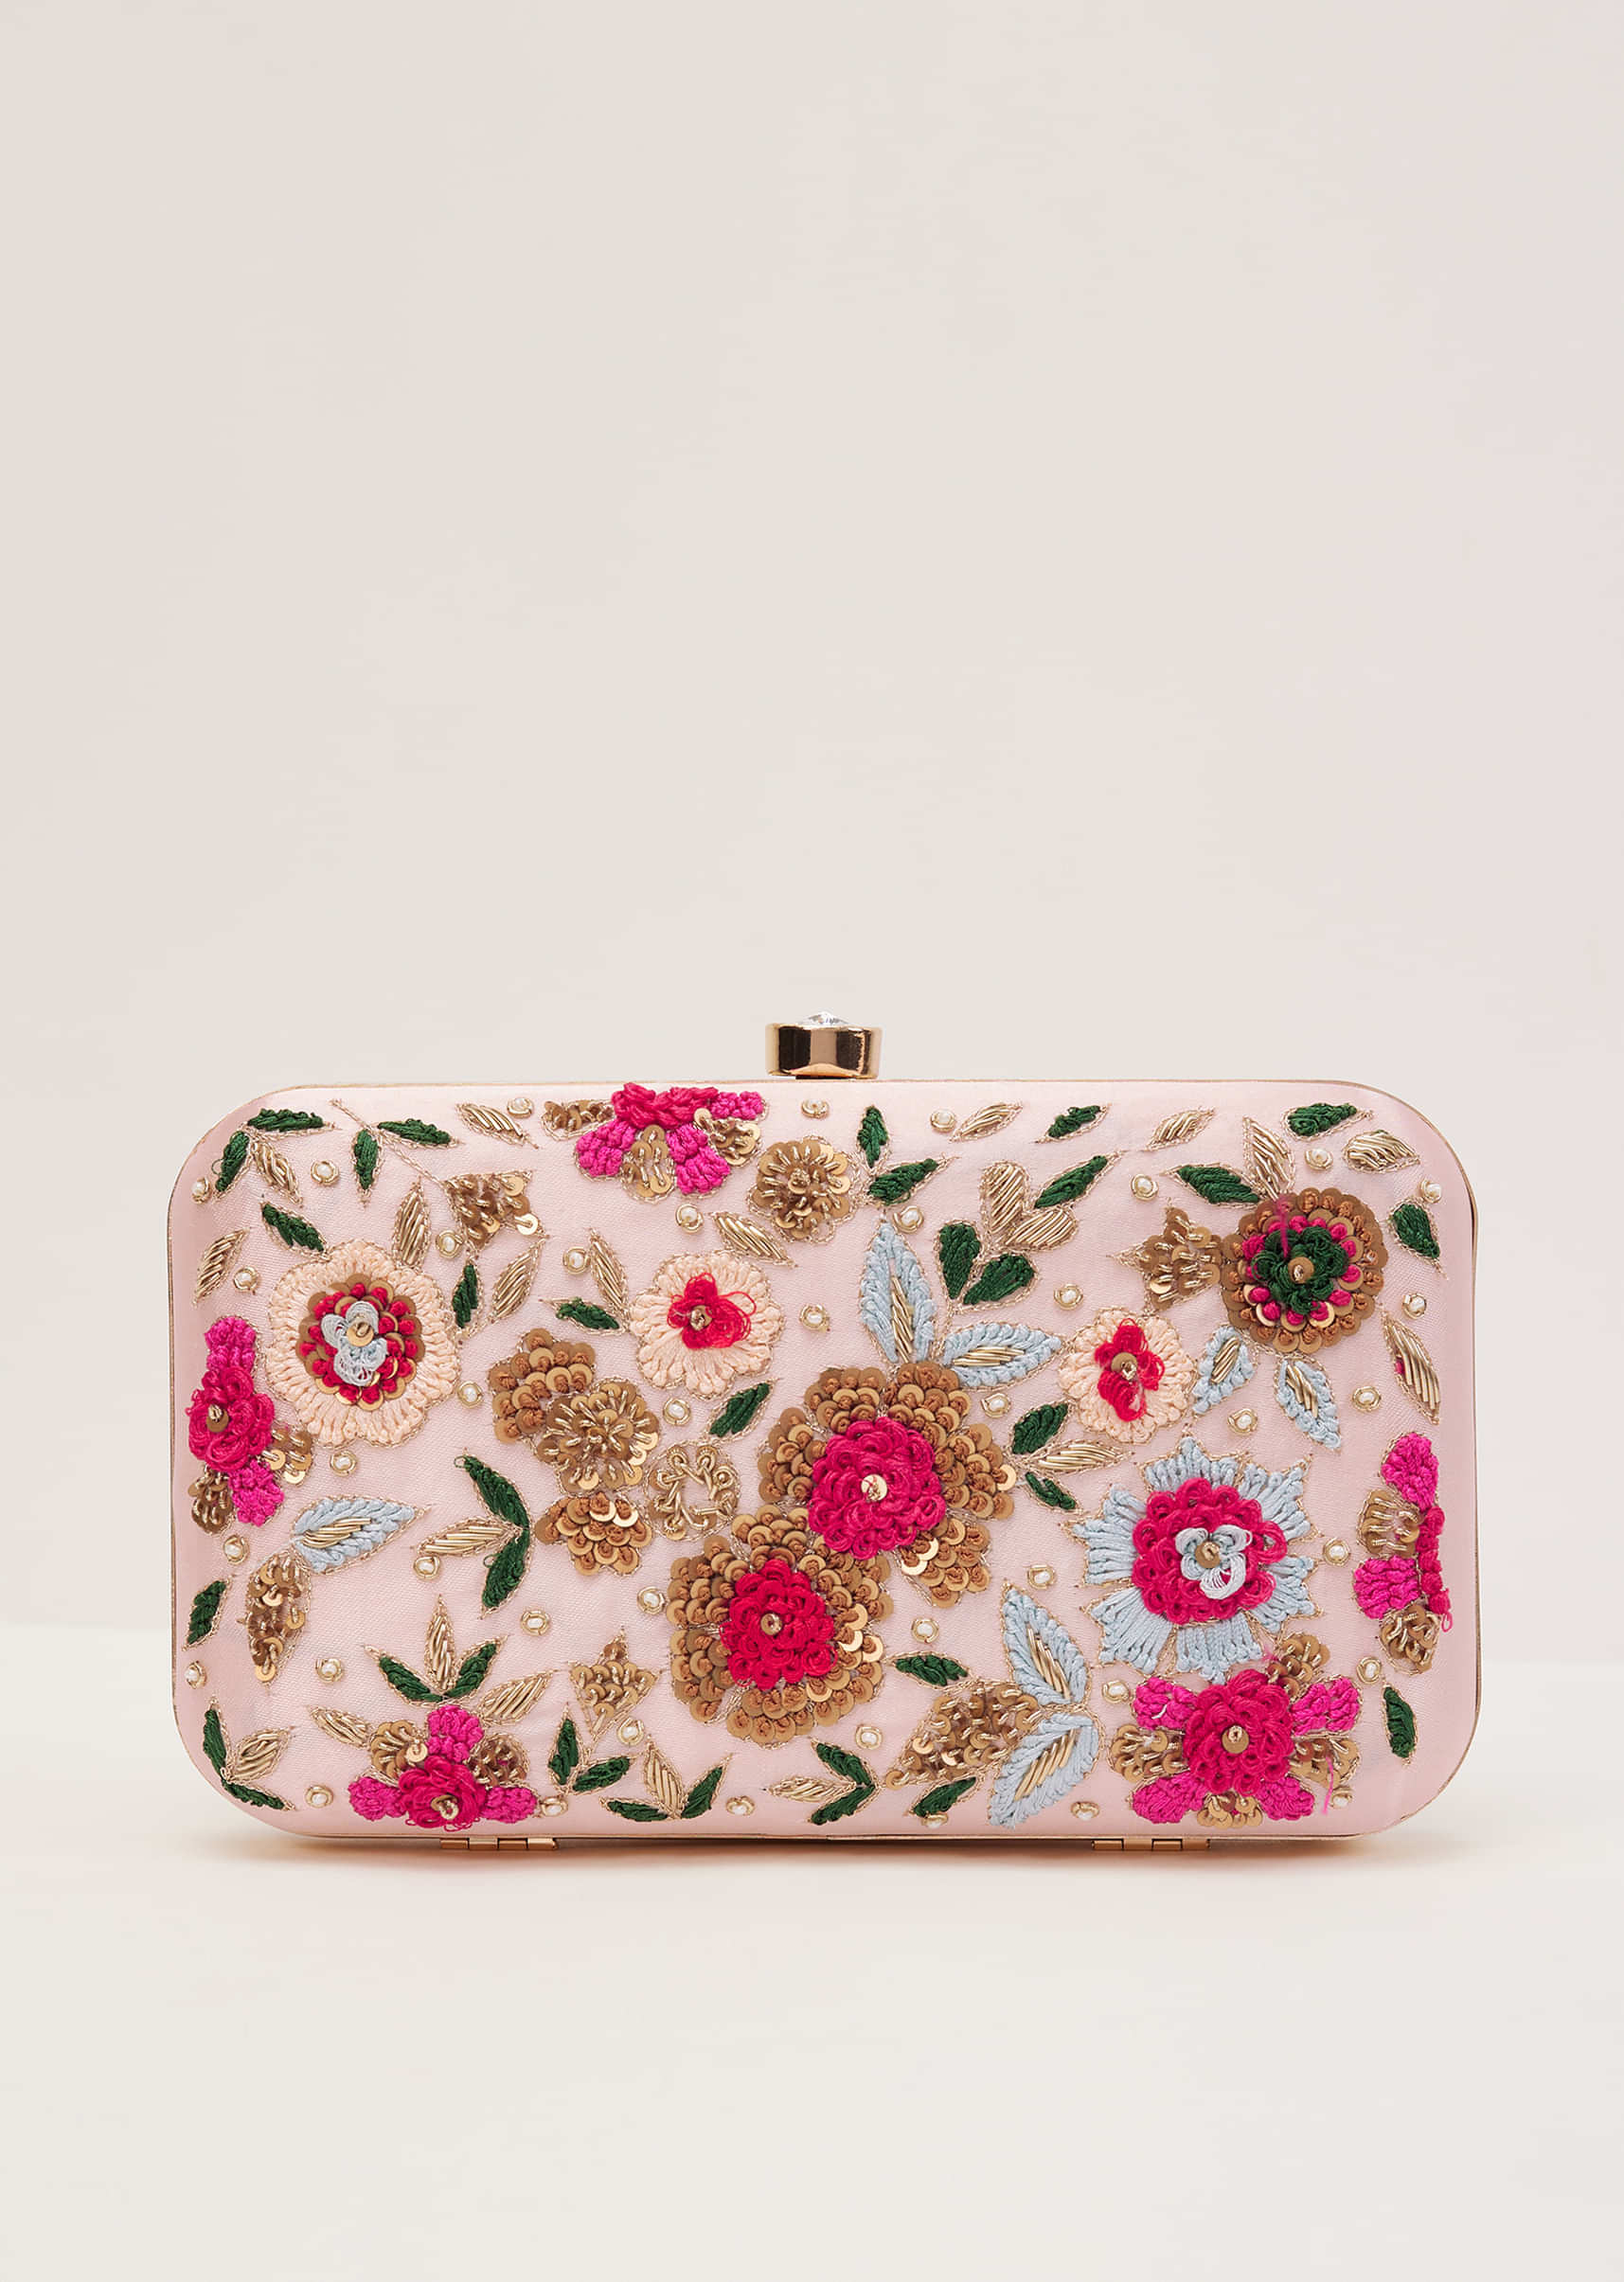 Floral Embroidered Clutch With Candy Pink Silk Base